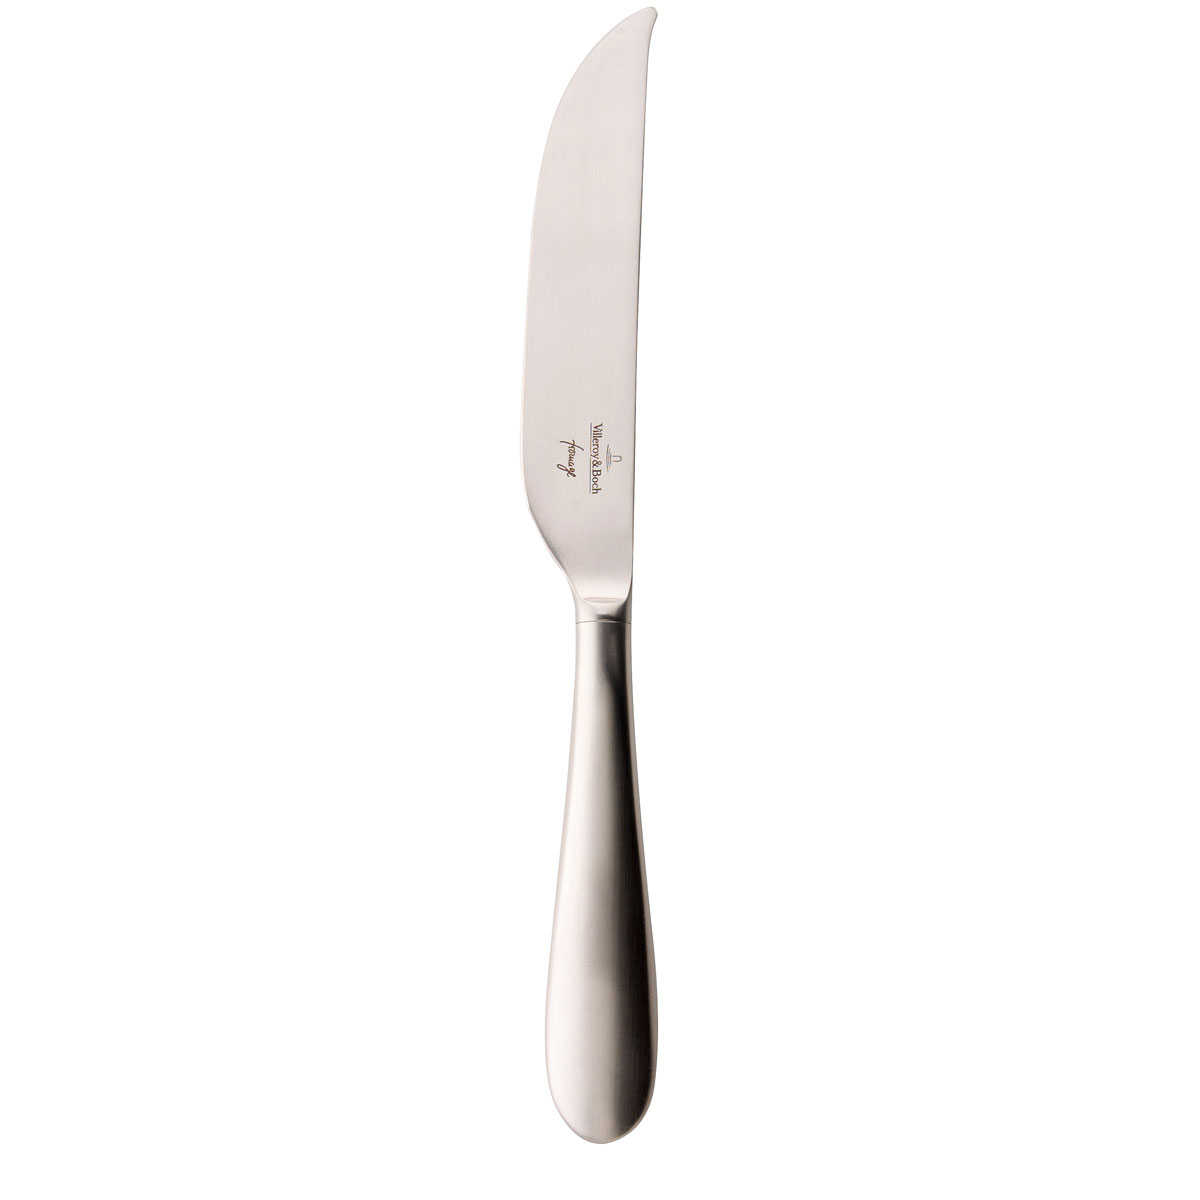 Villeroy and Boch Flatware Kensington Fromage Hard Cheese Knife